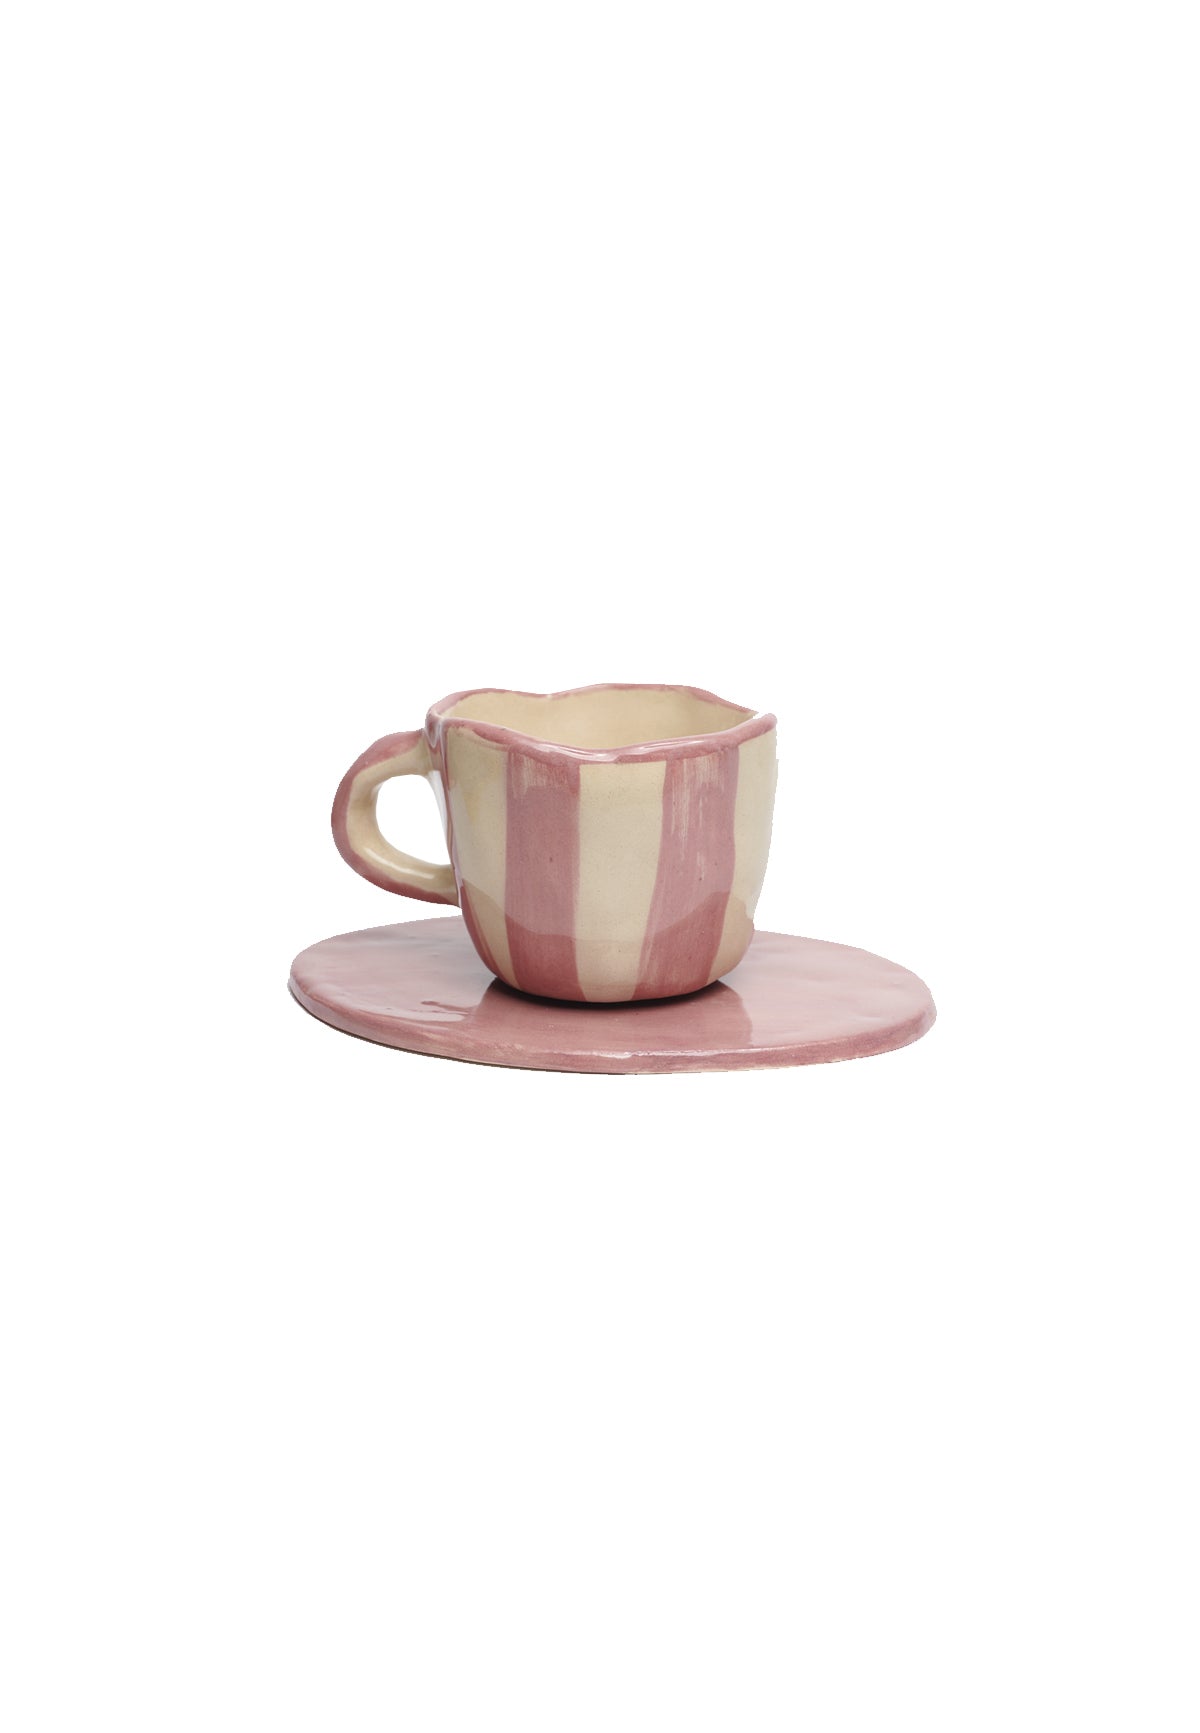 CUP AND PLATE PINK